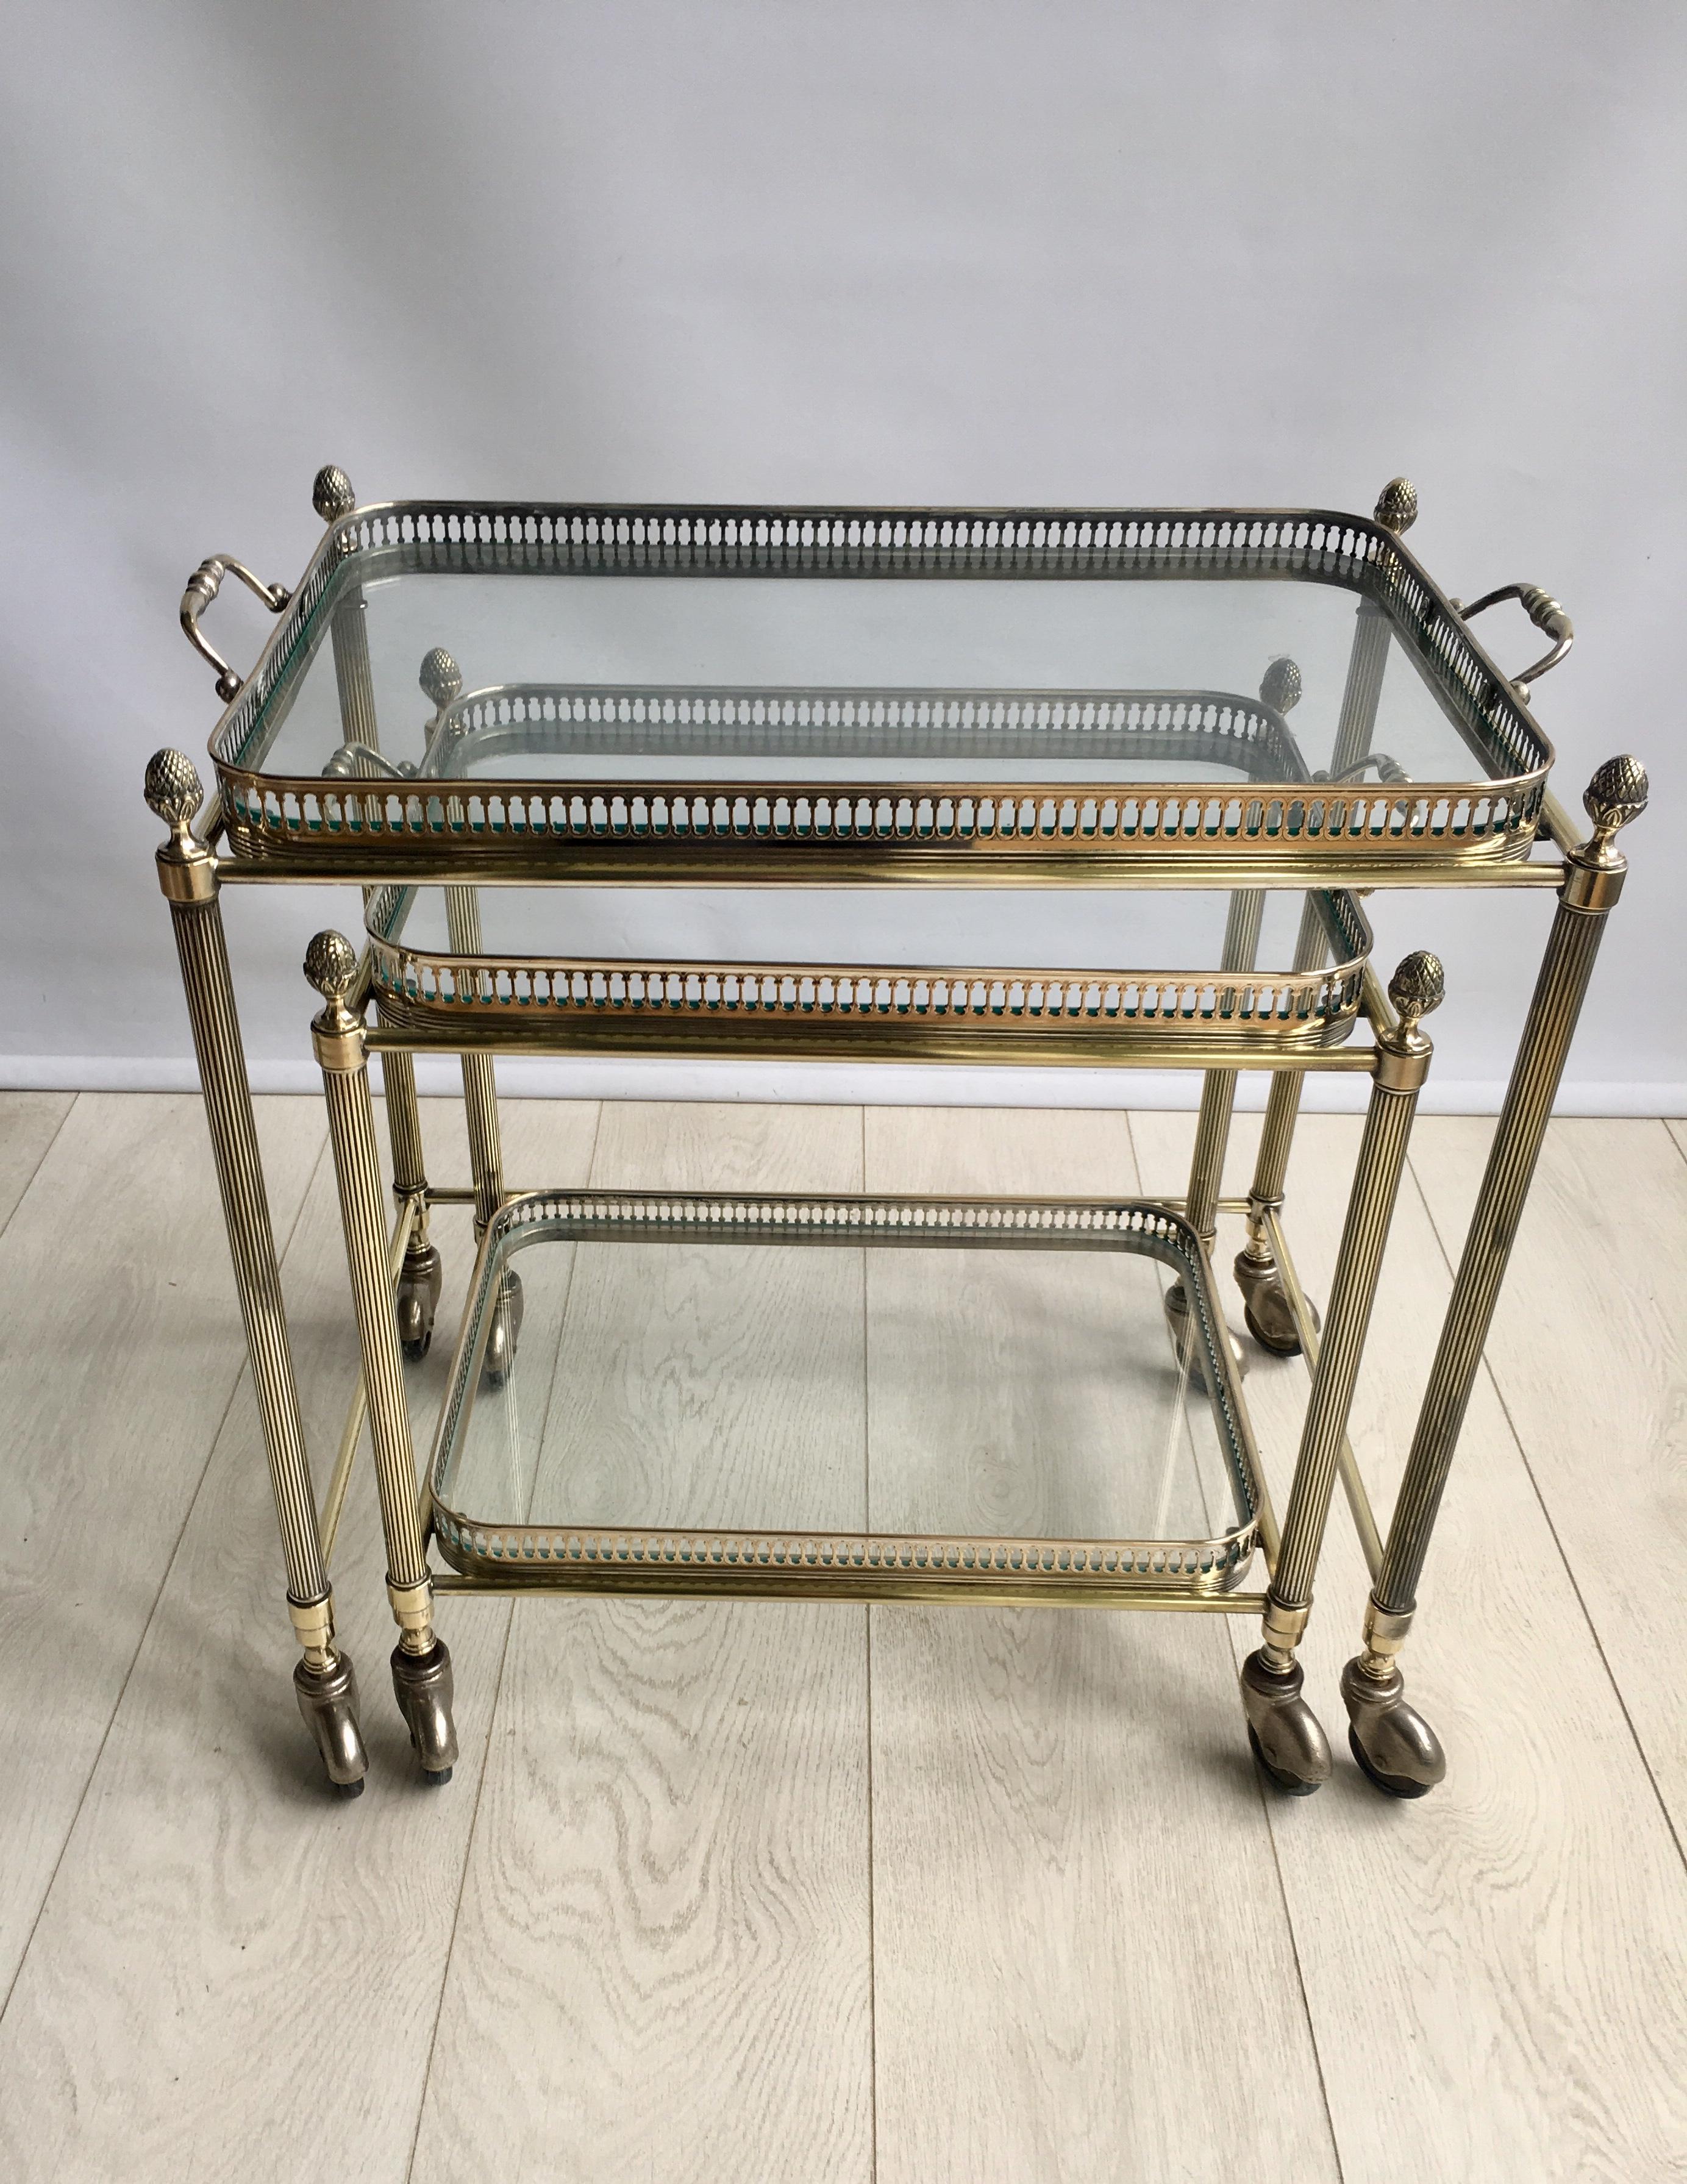 Lovely quality to this nest of two tables.

Useful pieces for the home.

The larger table top tray measures 50cm wide by 32.5cm deep, overall dims incl handles 58cm wide, 36cm deep.
Stands 50 cm to glass, 53.5 cm to handle.